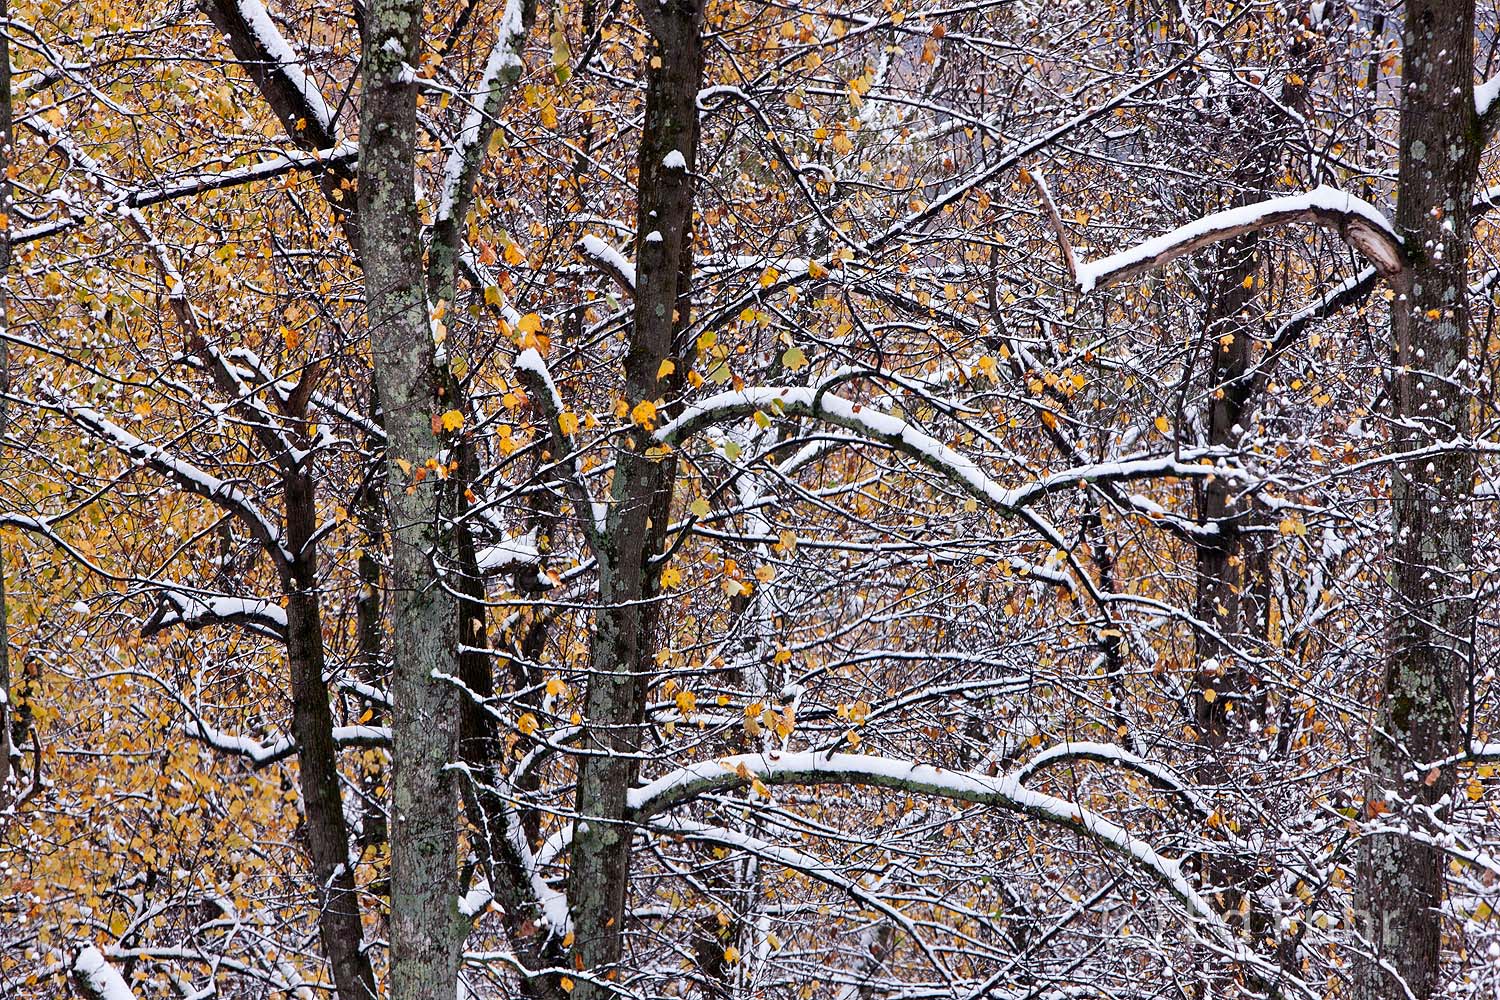 A dusting of snow covers the autumn branches.